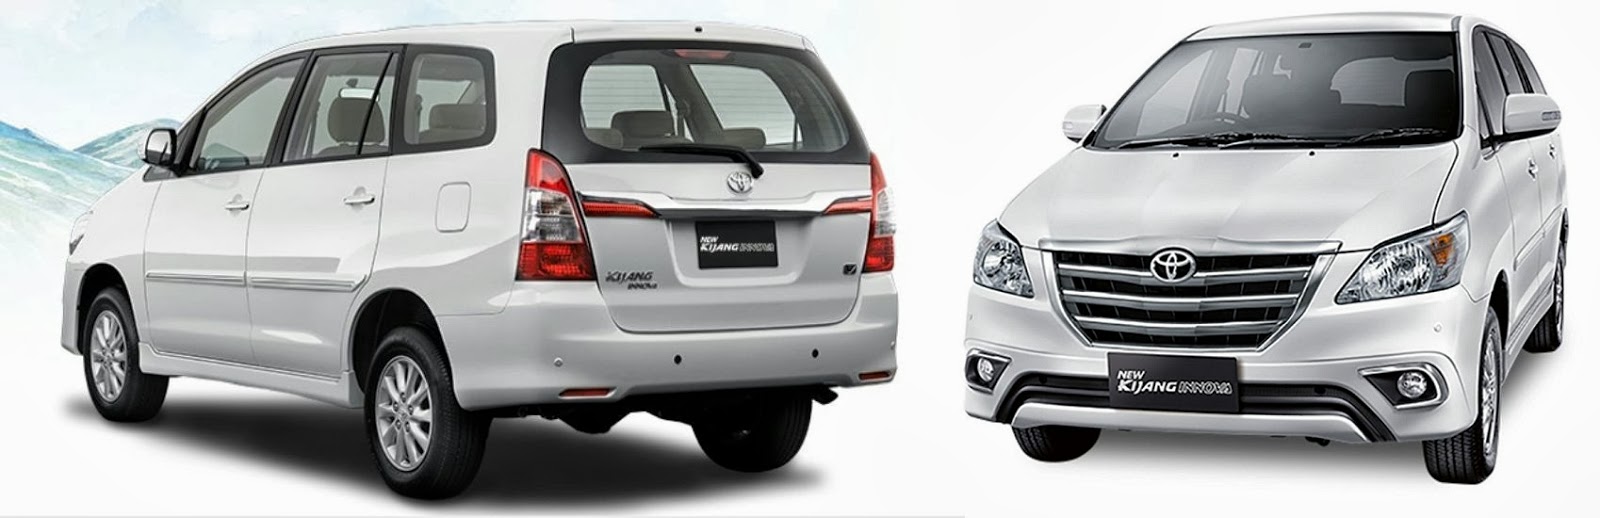 Wheel O Mania New Toyota Innova Launch Soon Prices Leaked On